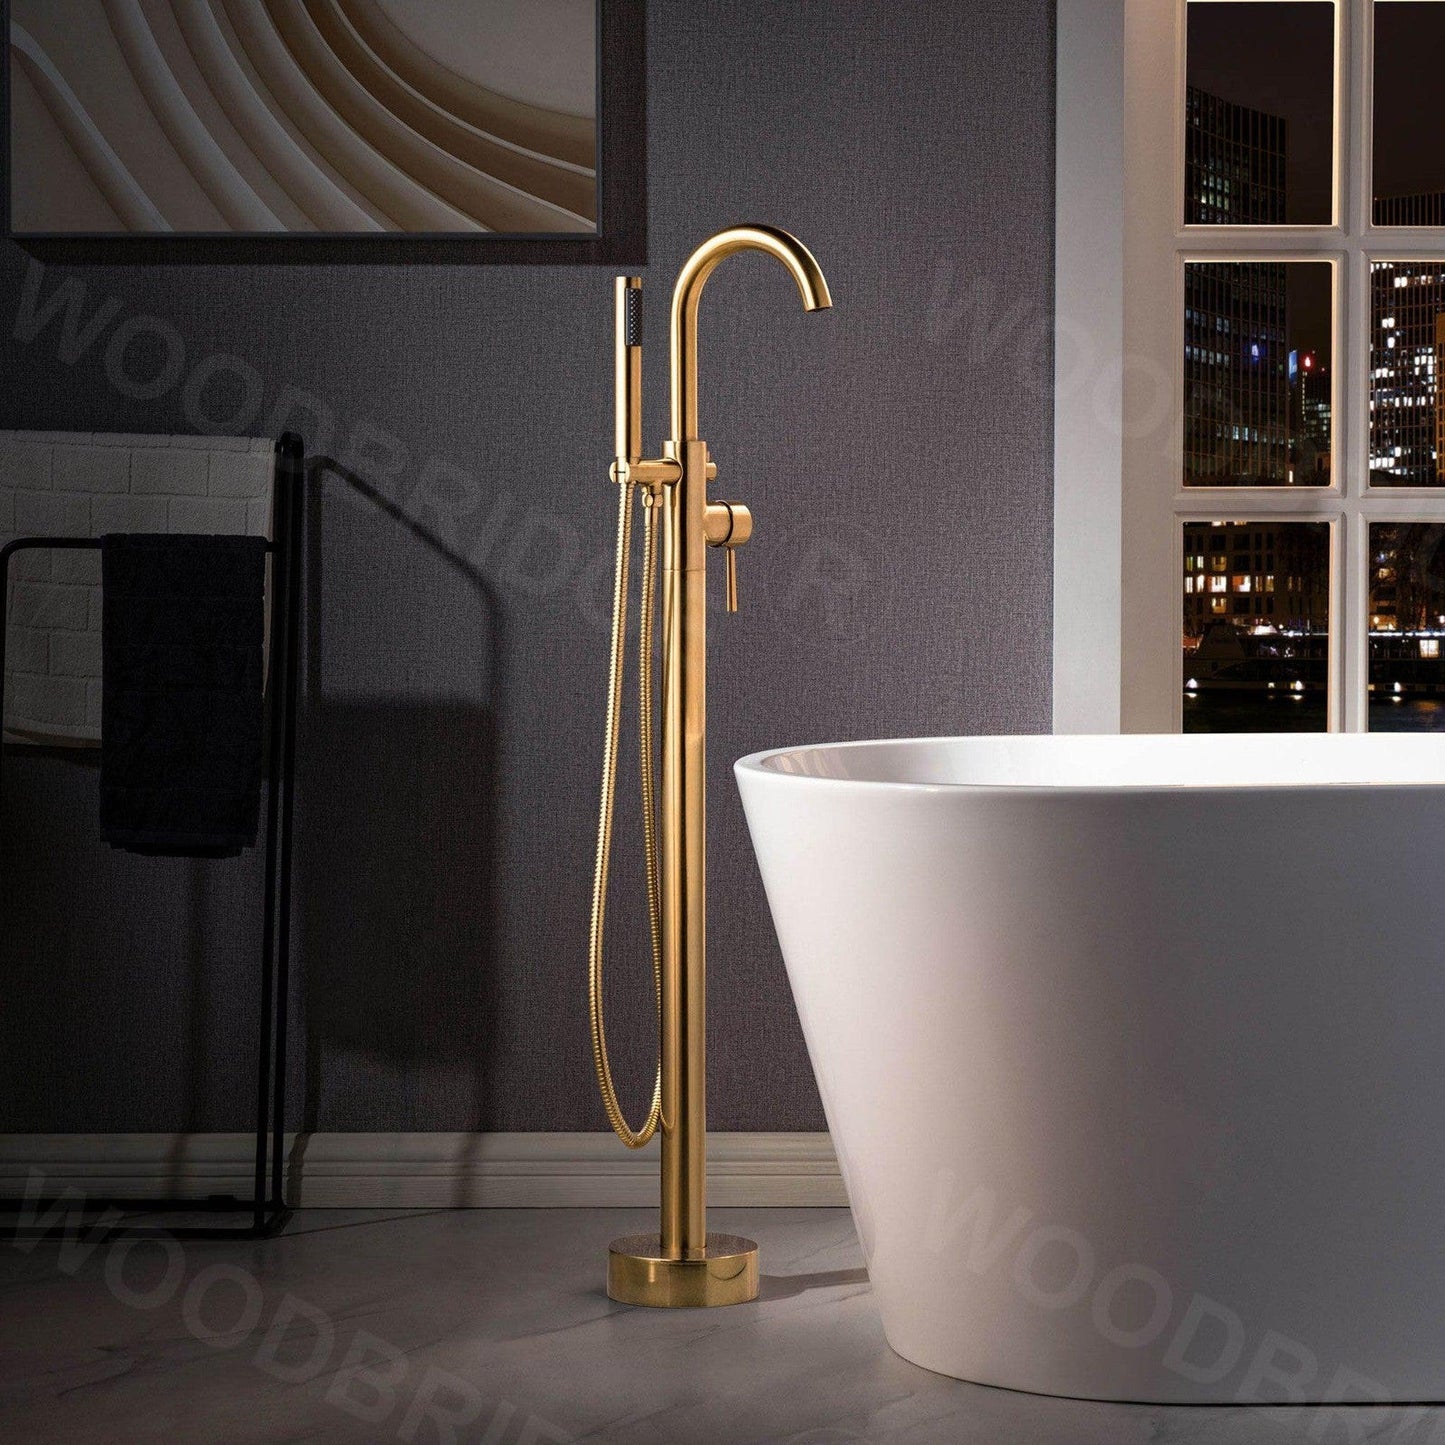 WoodBridge 59" Glossy White Lucite Acrylic Freestanding Double Ended Soaking Bathtub With Brushed Gold Center Drain Assembly, Overflow, F0026BGRD Tub Filler and Caddy Tray